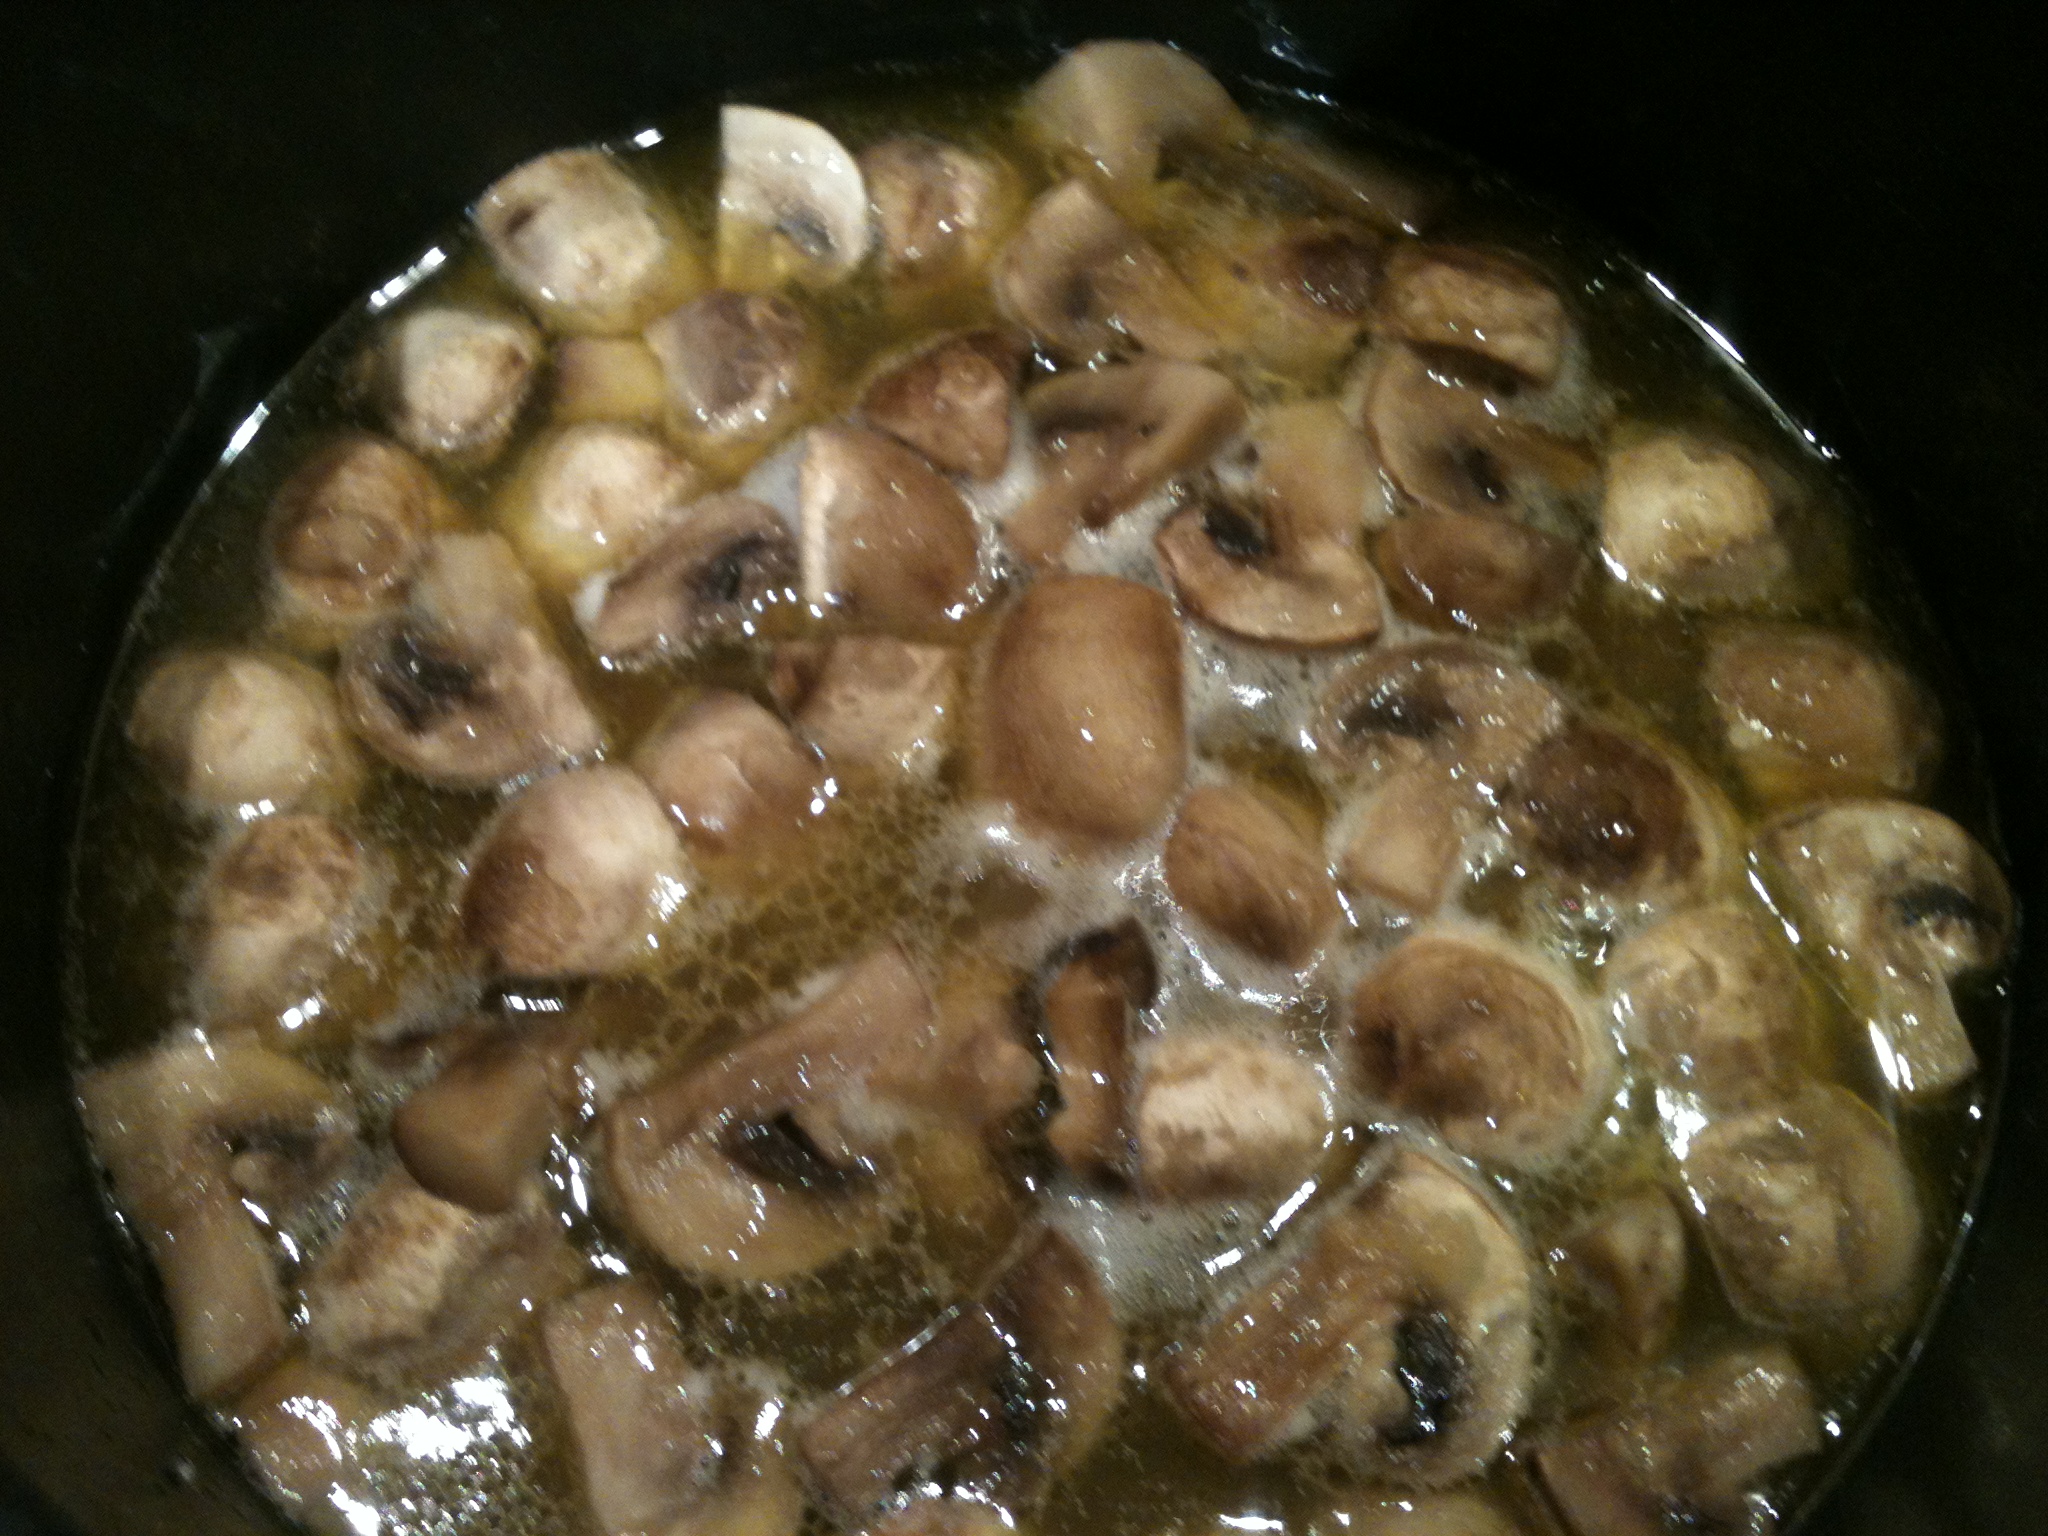 10. In the sauce, add the veal meat, the onions, and the mushrooms.